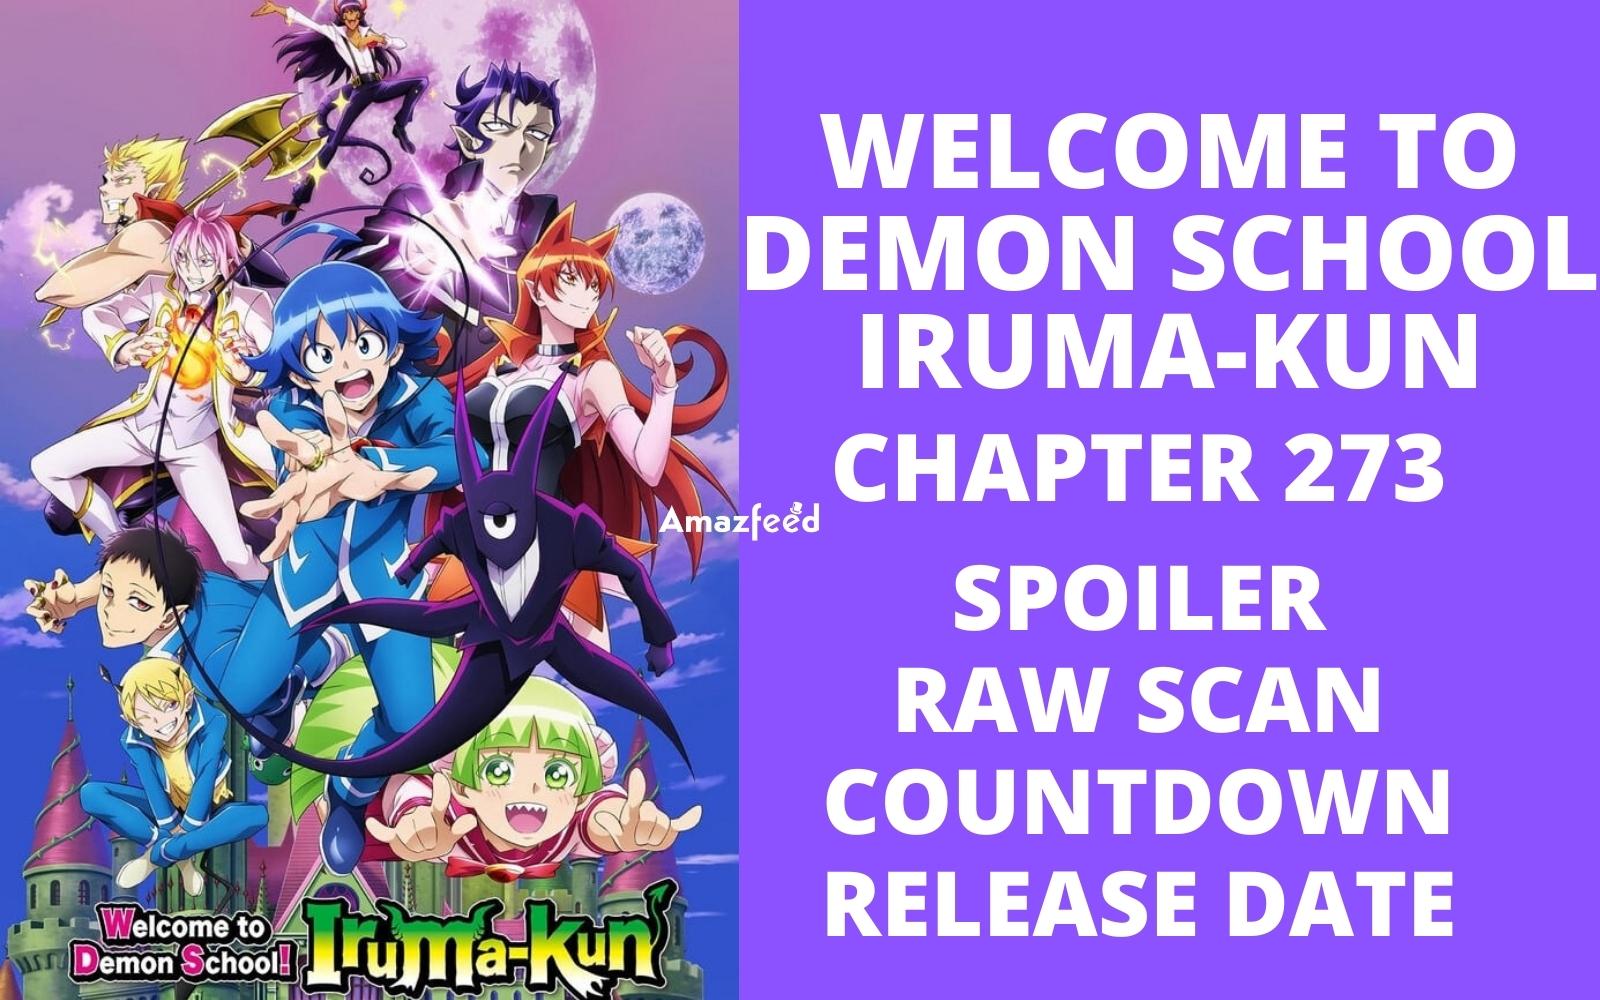 Welcome To Demon School Iruma-Kun Chapter 273 Spoiler, Release Date - Everything we know so far